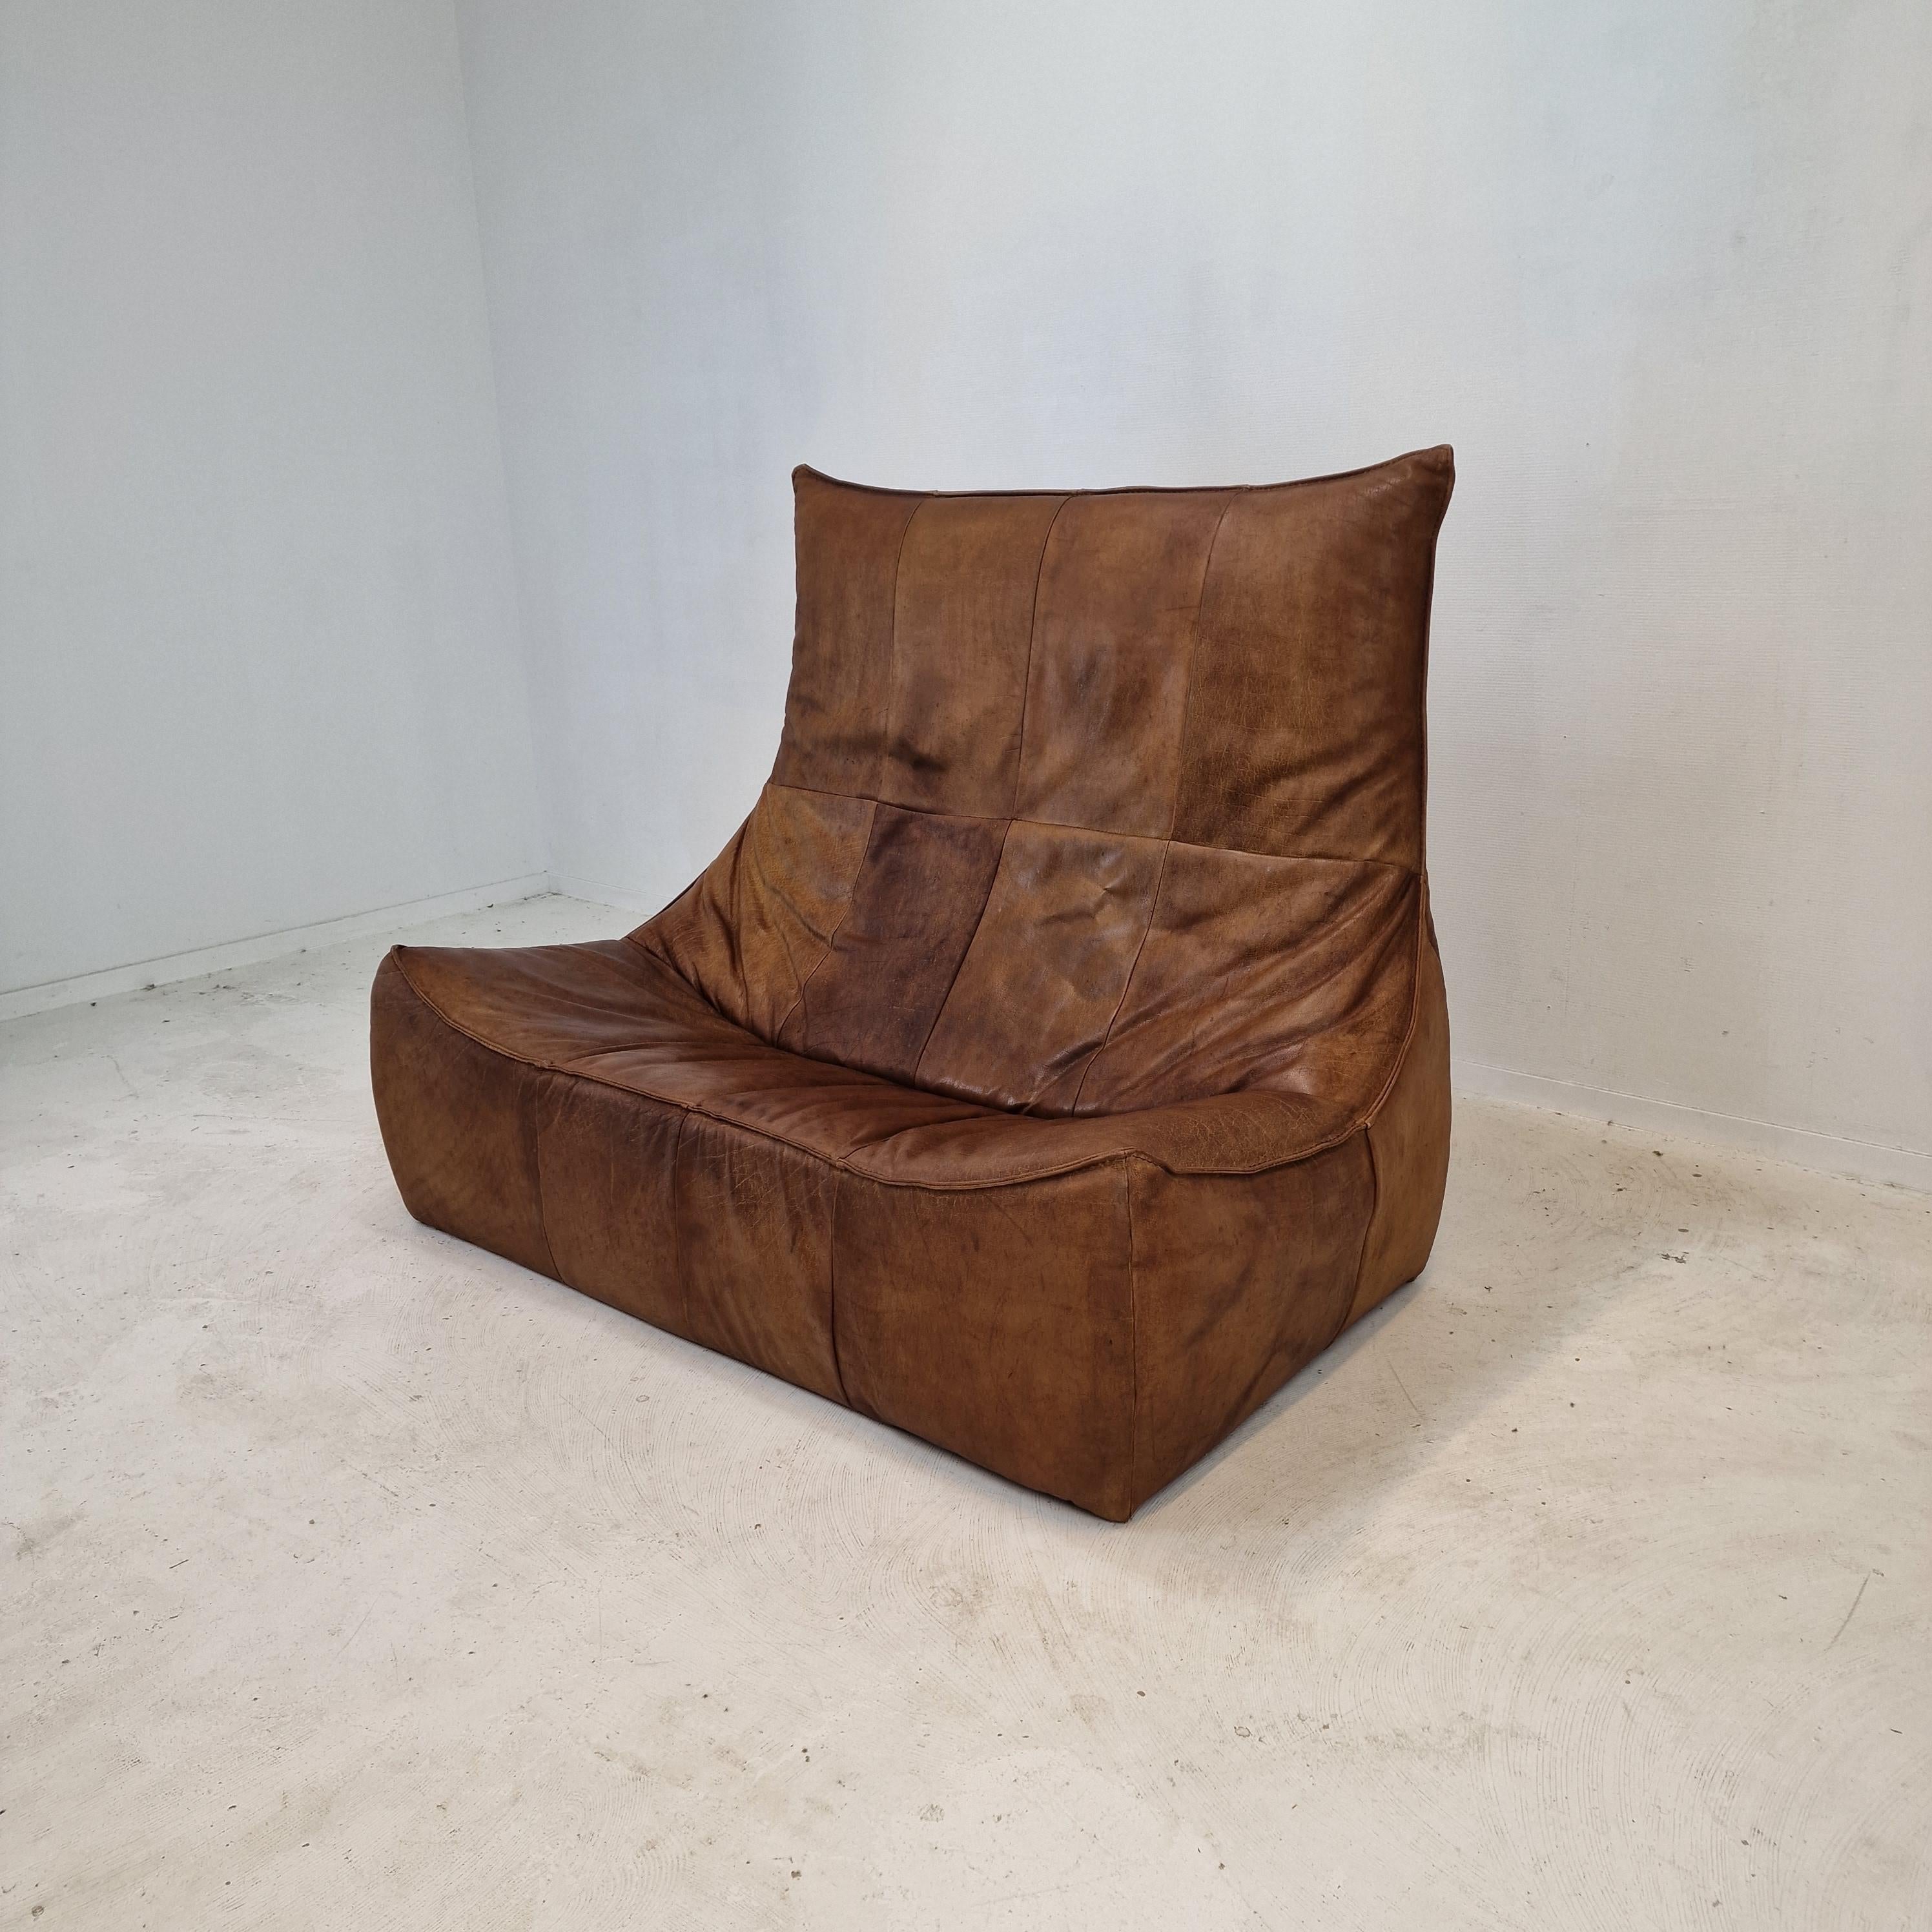 Modern Montis “The Rock” Sofa In Brown Leather By Gerard Van Den Berg, 1970s For Sale